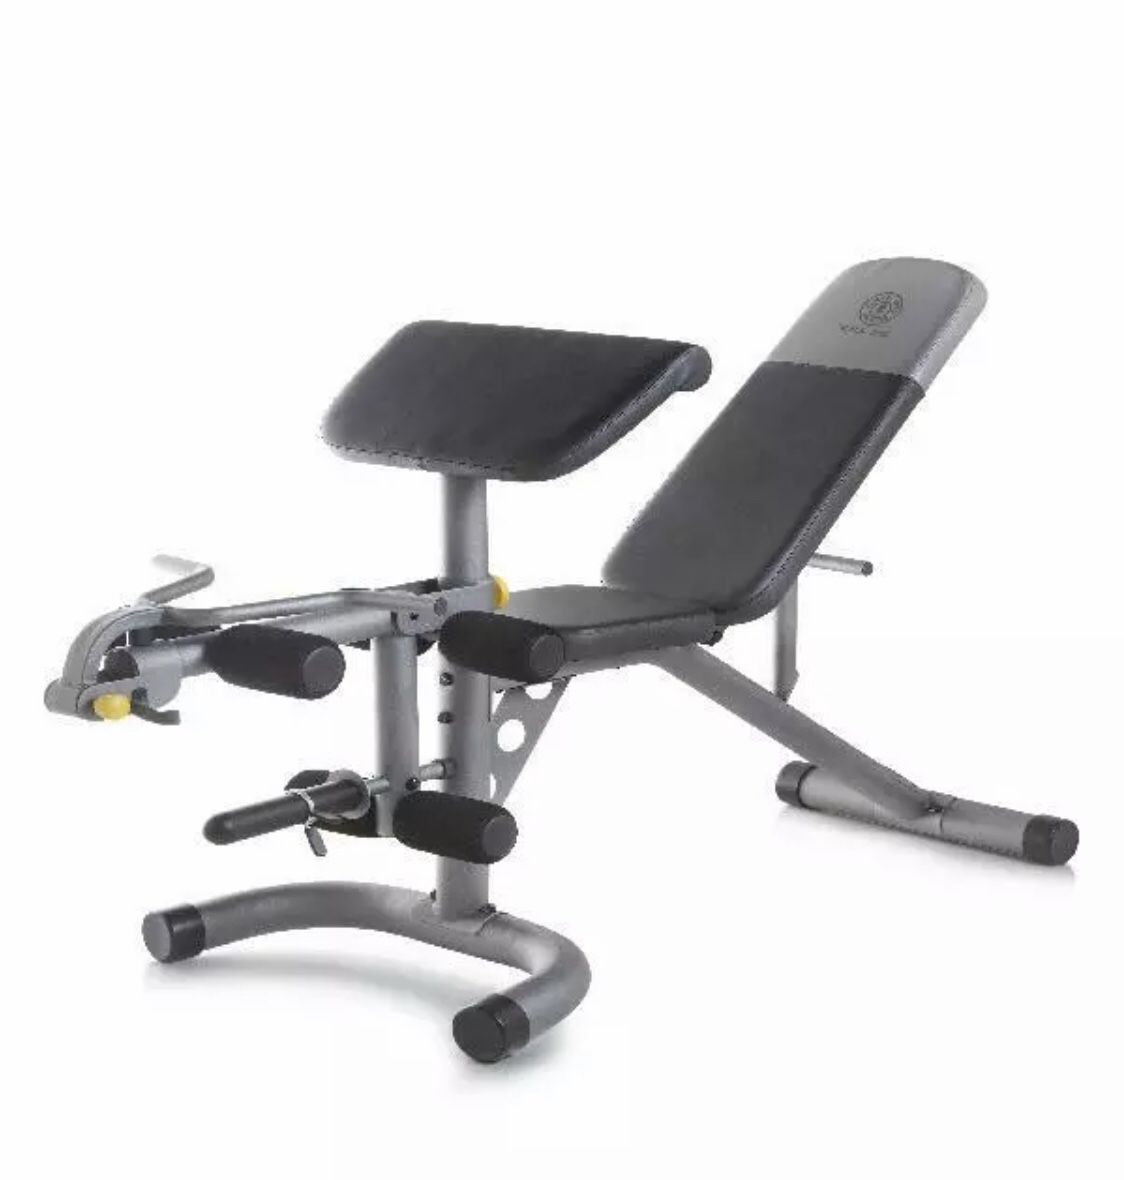 🔥 BRAND NEW Workout Bench W Removable Preacher Pad